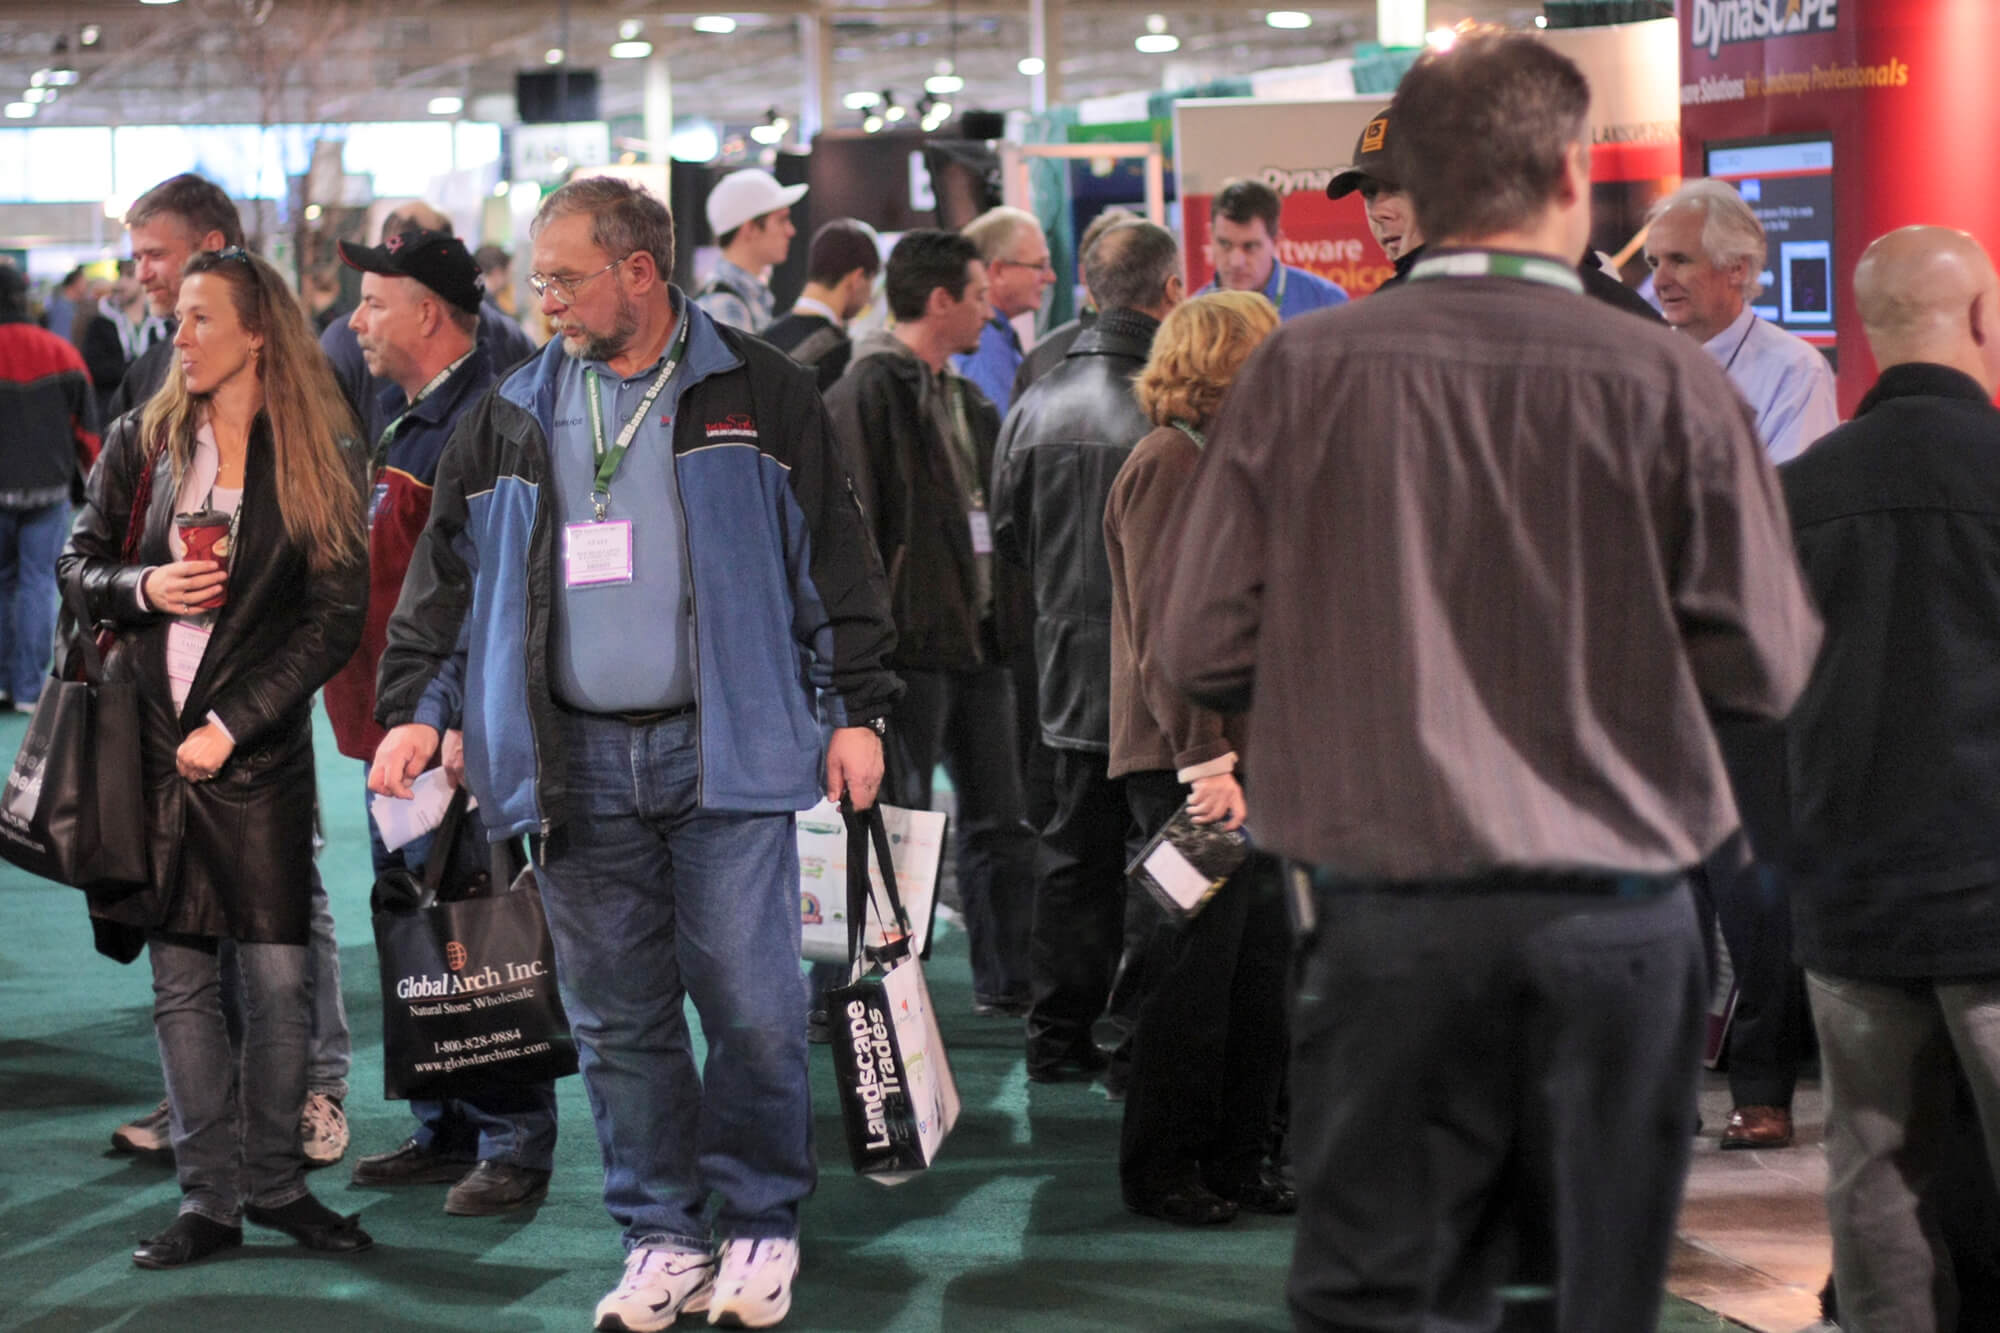 people walking the aisle at a trade show